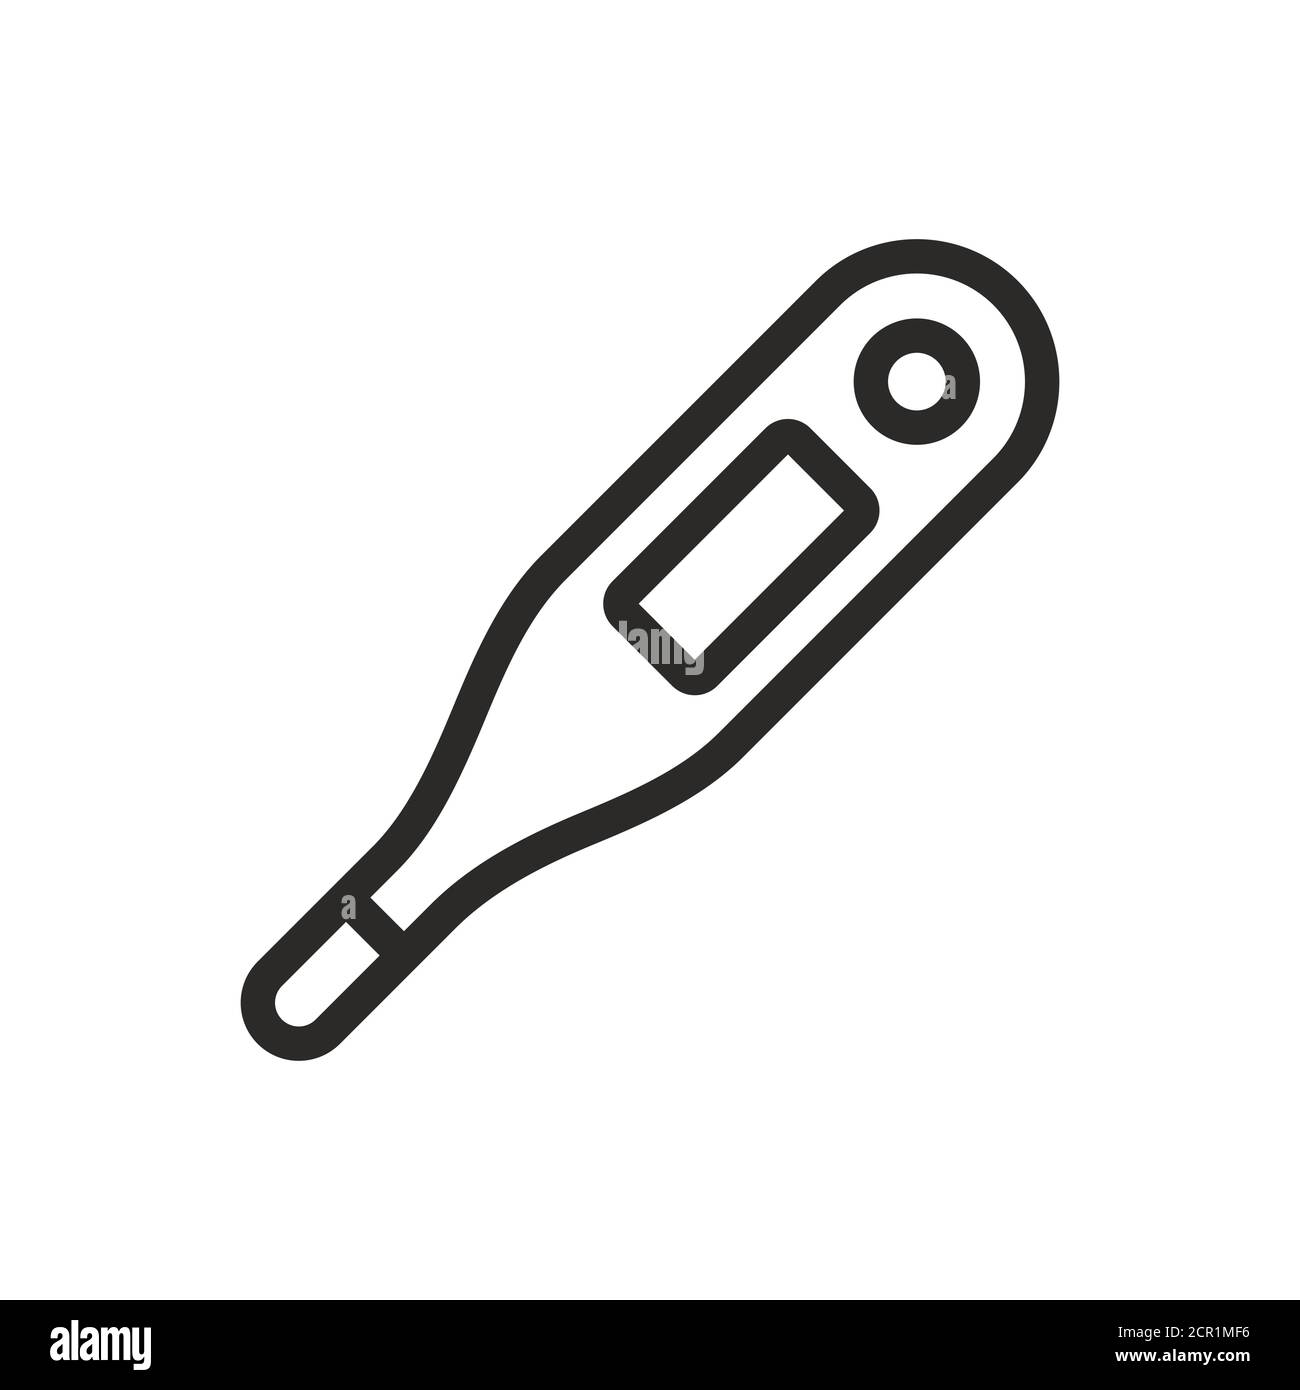 Digital thermometer icon. Fever, high temperature. Vector icon isolated on white background. Stock Vector